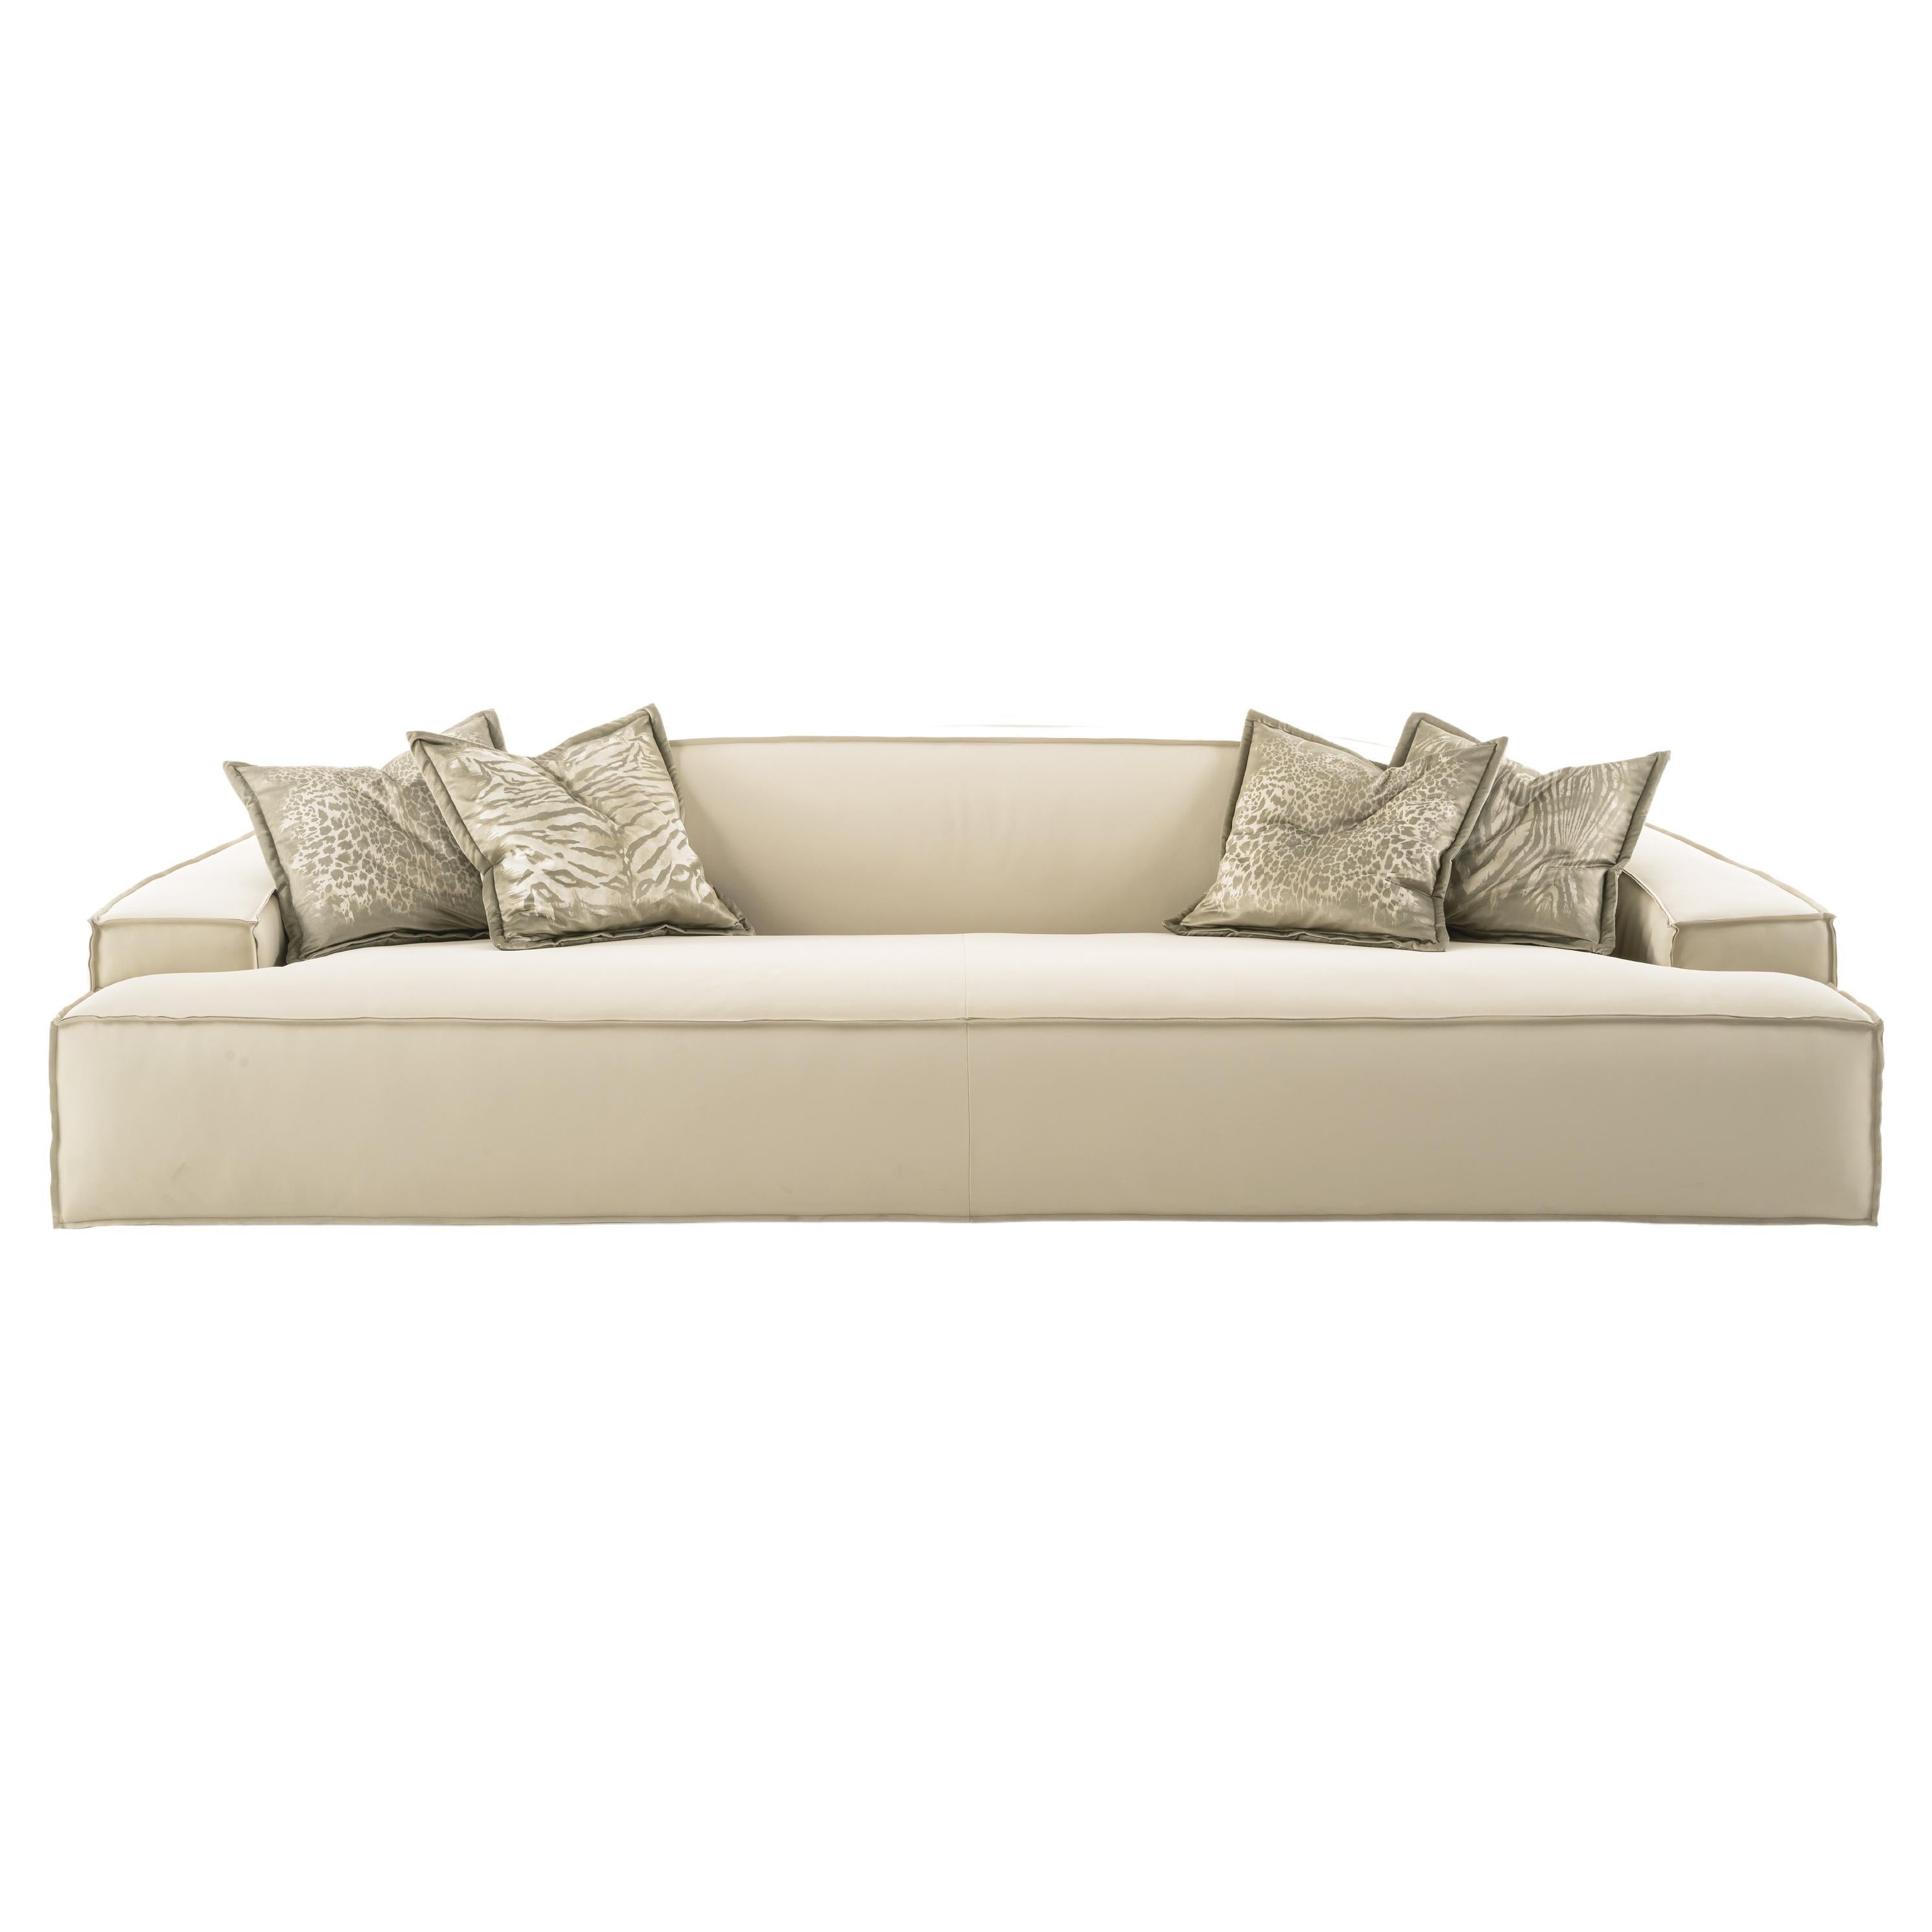 21st Century Assal Sofa in Leather by Roberto Cavalli Home Interiors For Sale